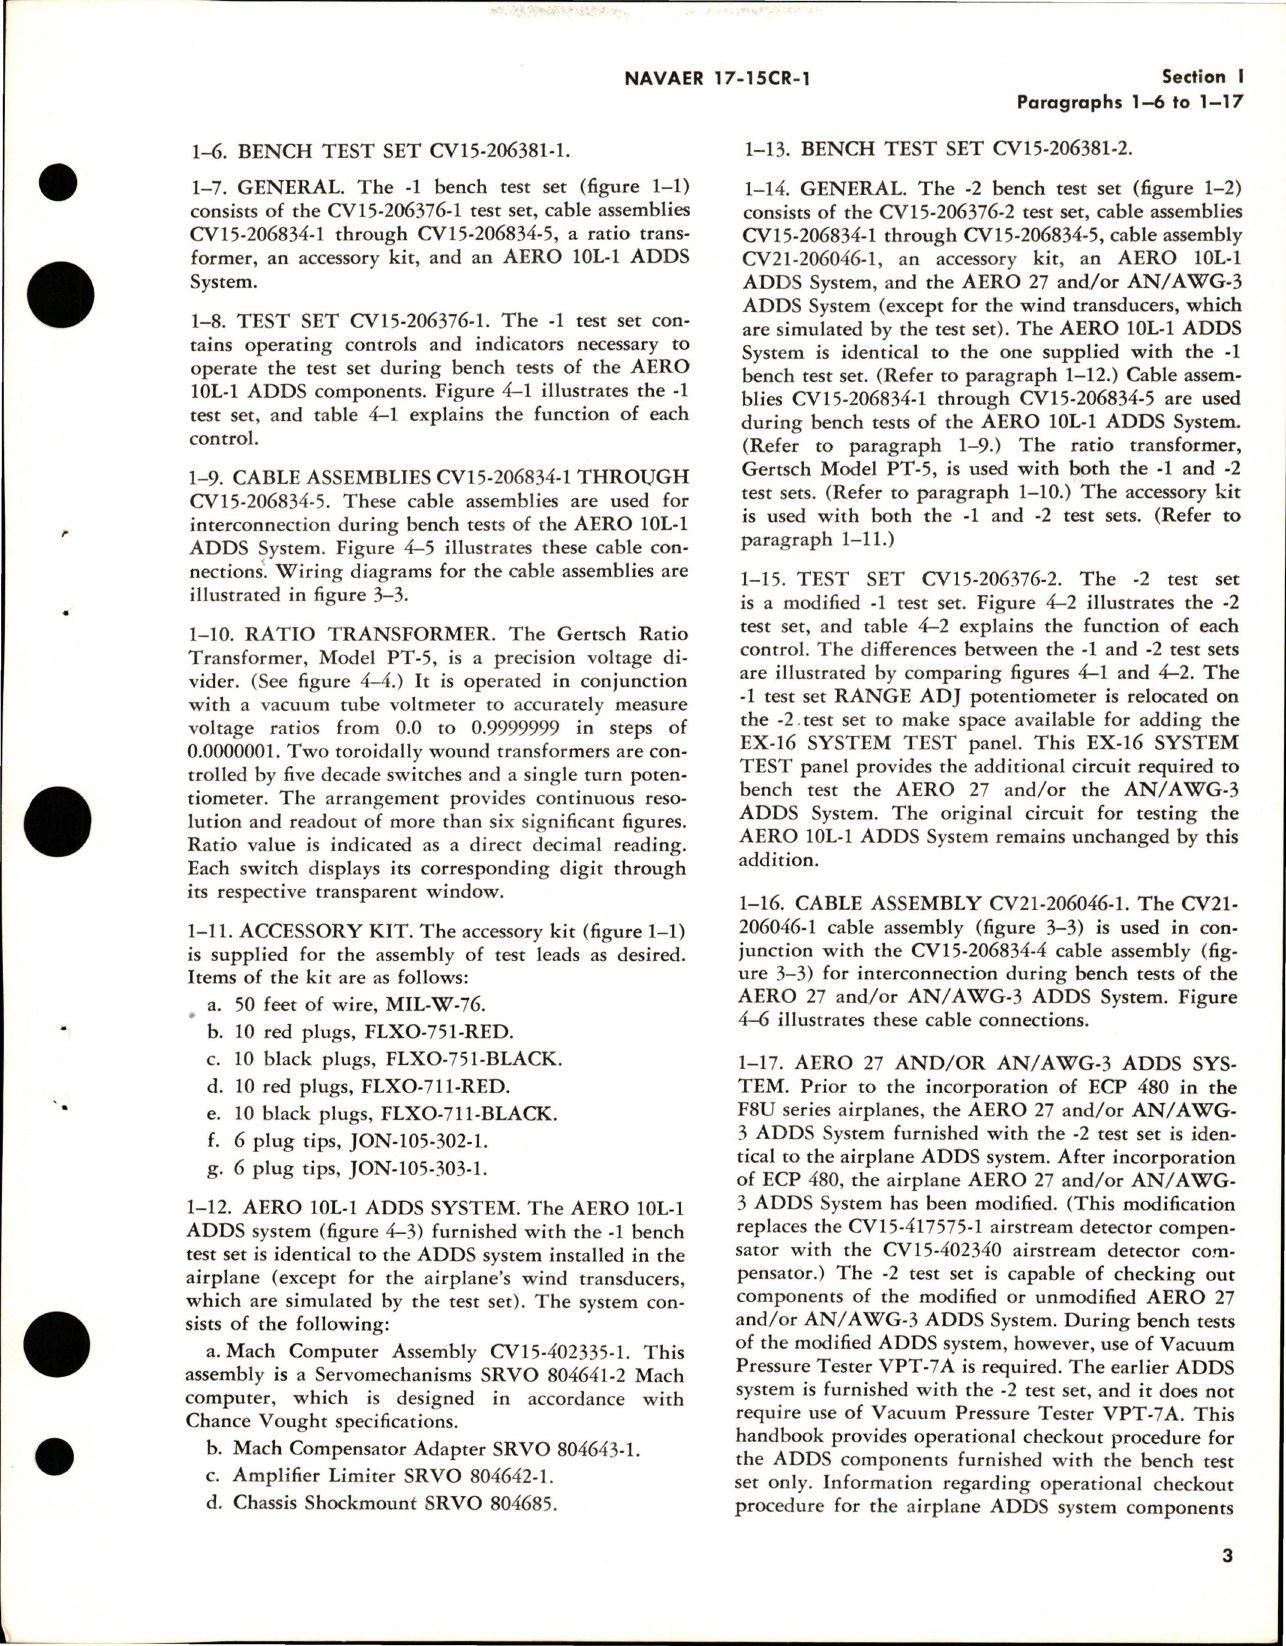 Sample page 9 from AirCorps Library document: Operation and Service Instructions with Illustrated Parts for Airstream Directional Reference System Bench Test Sets - CV15-206381-1 and CV15-206381-2 